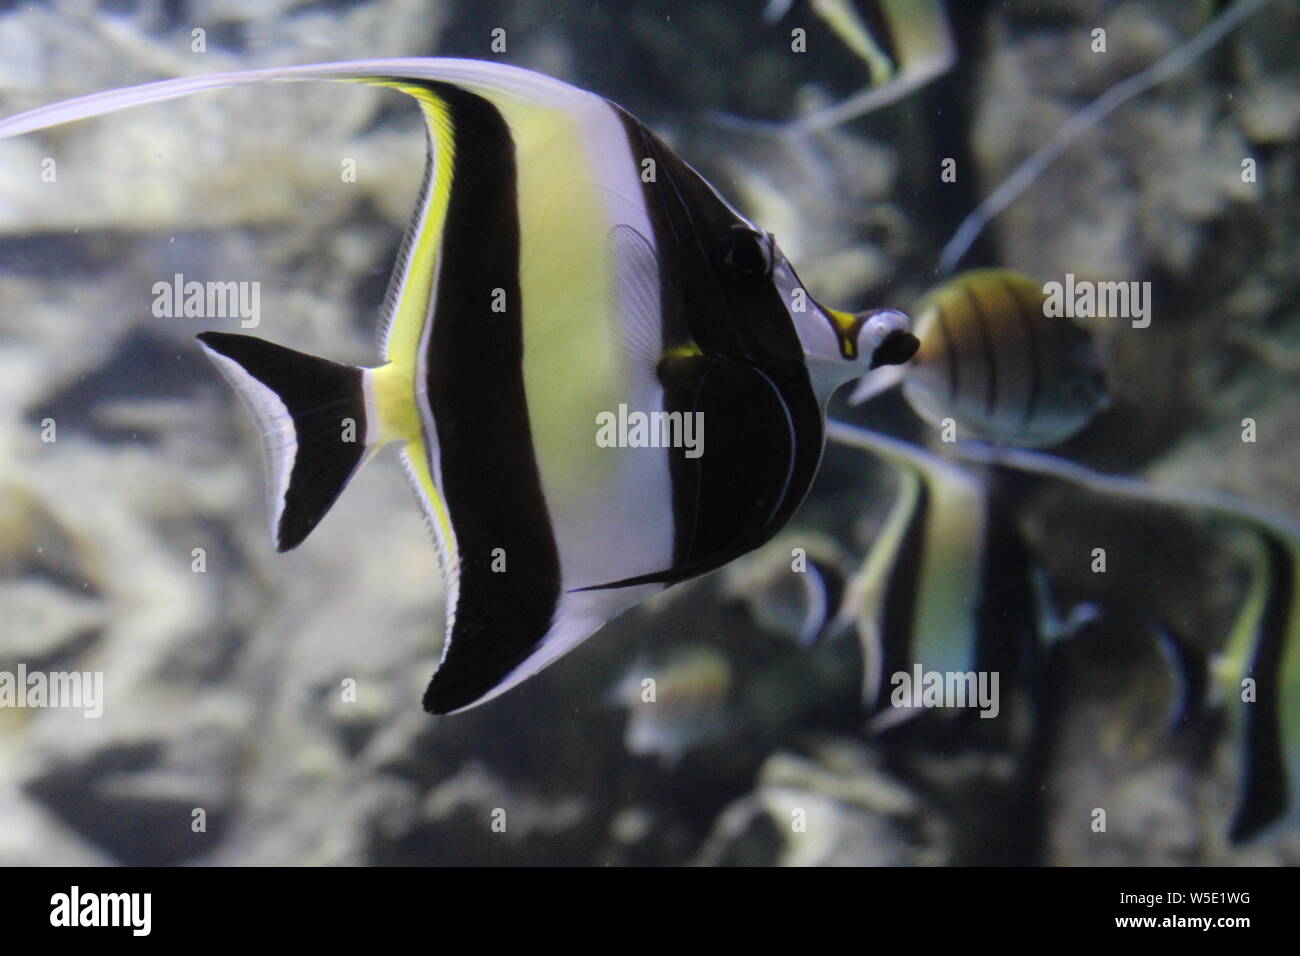 Fish striped angelfish in the water of the aquarium. Stock Photo